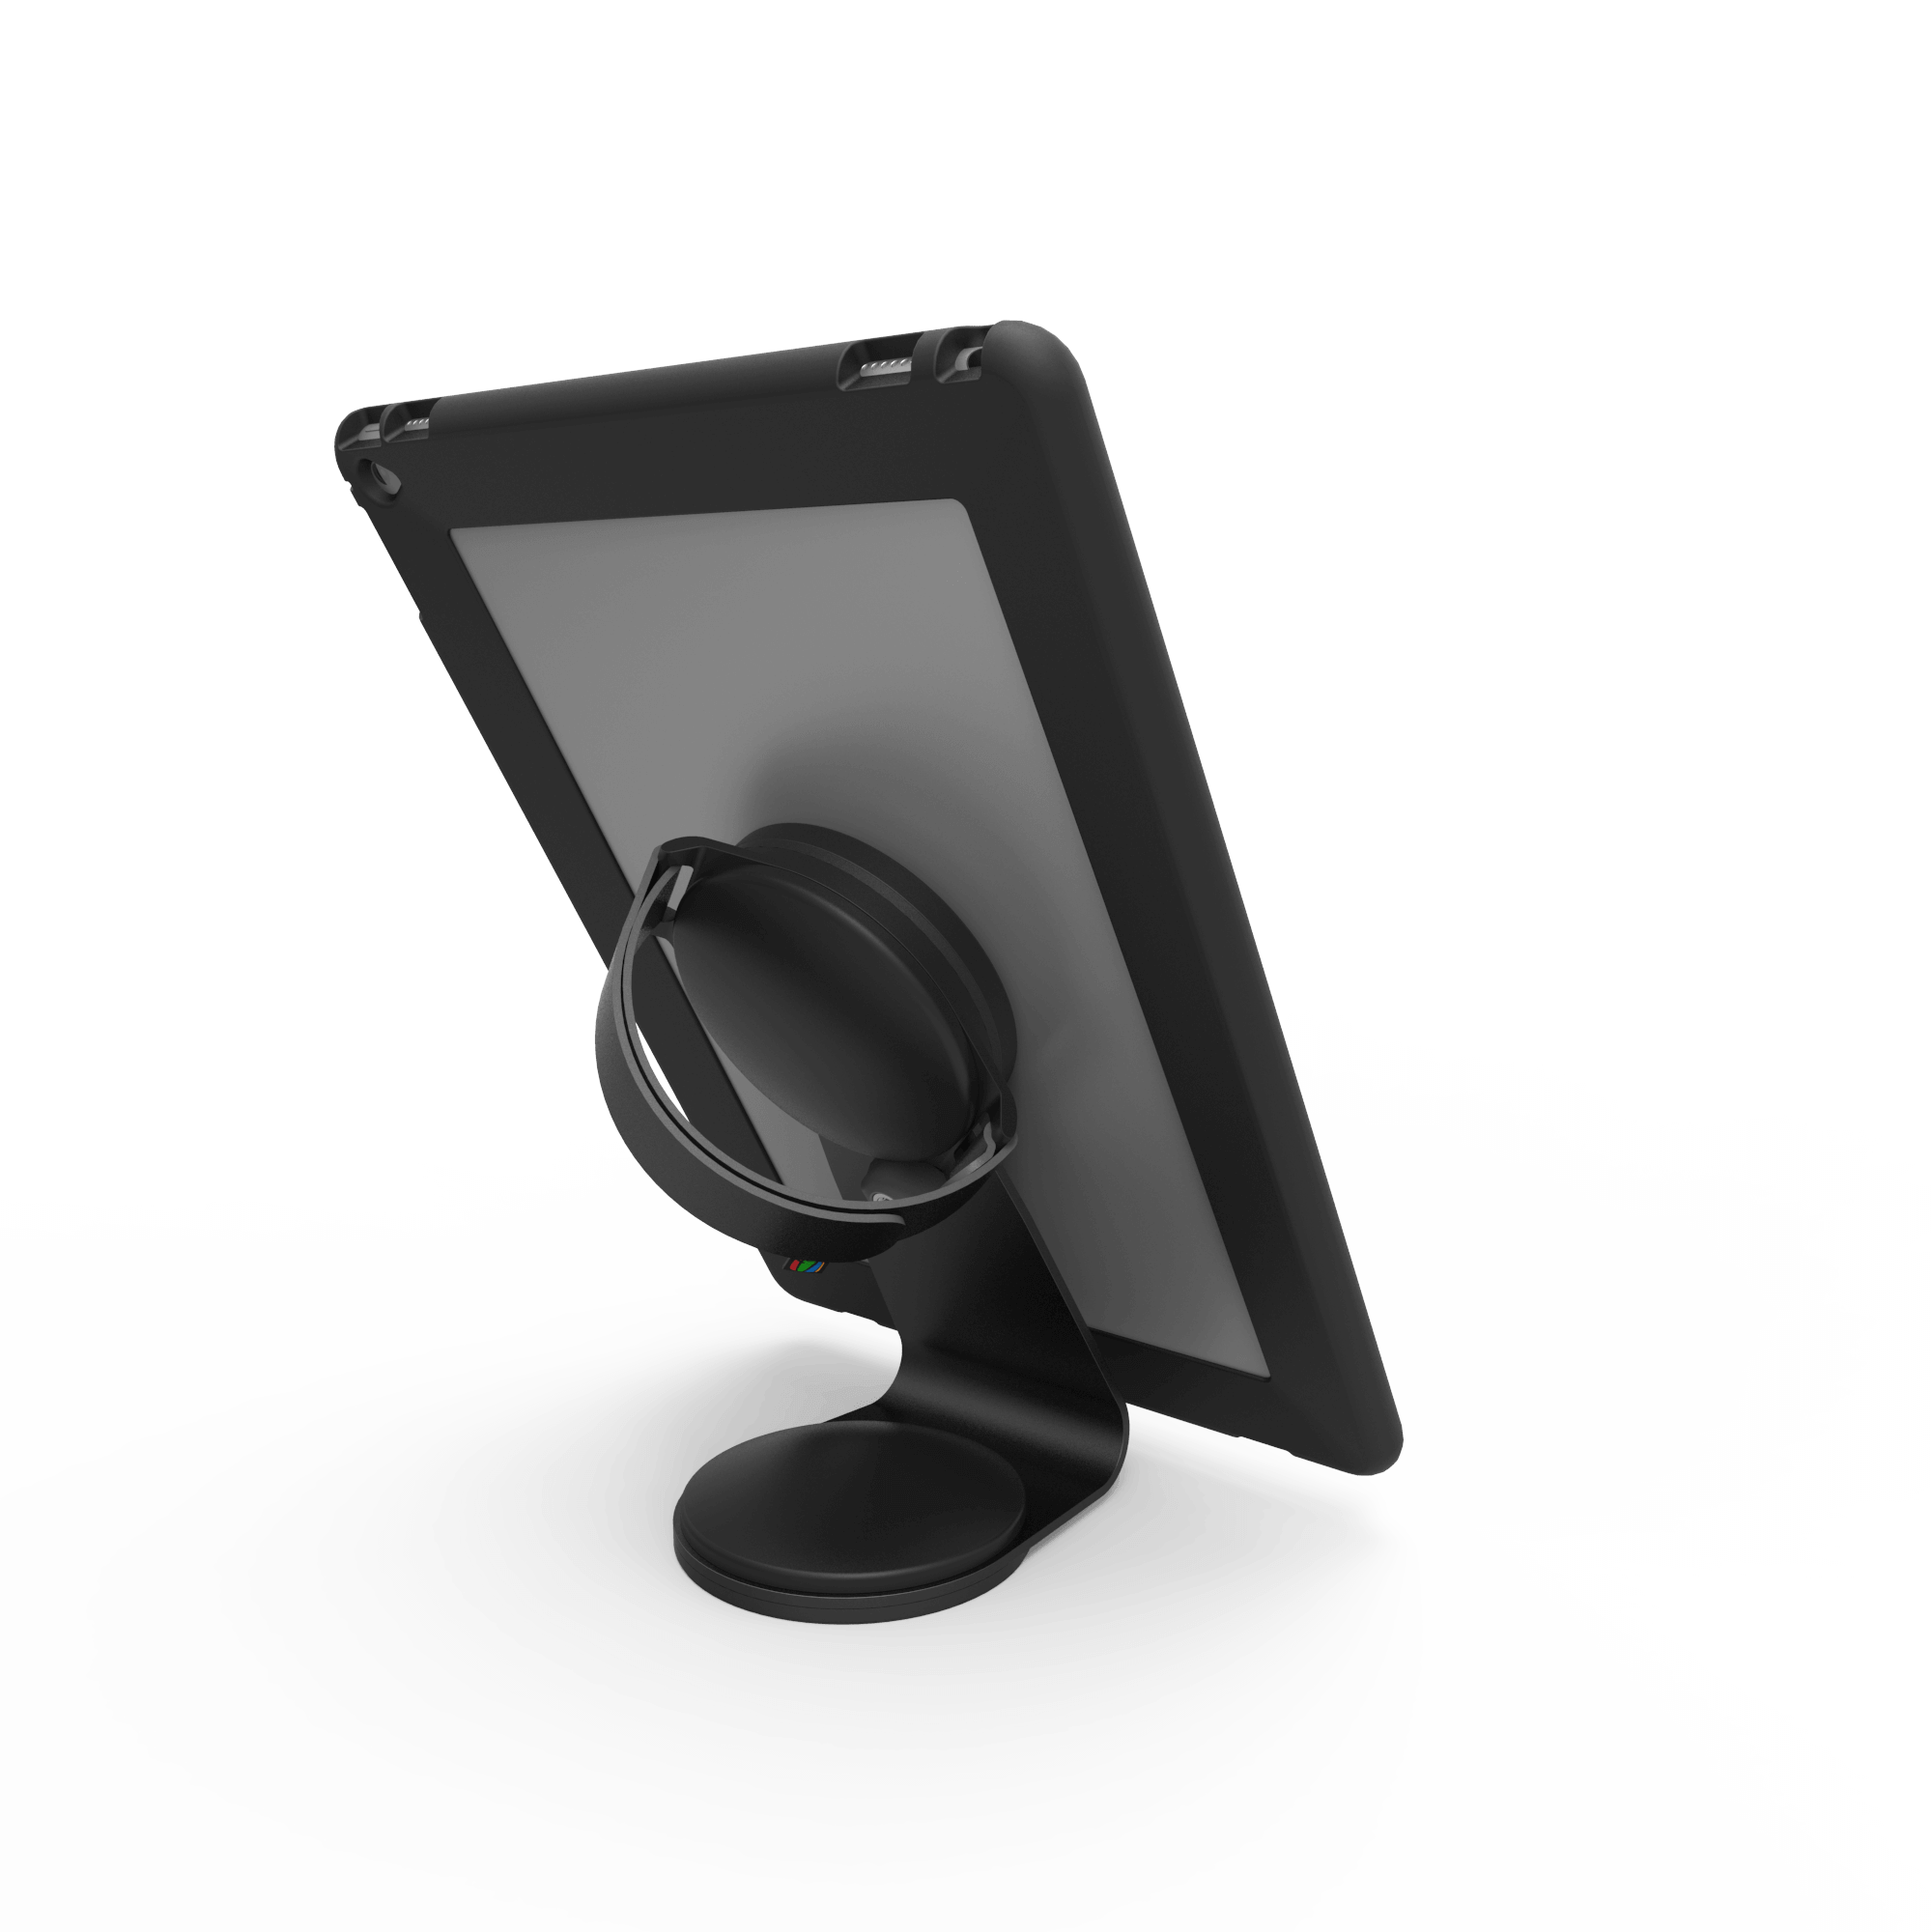 This Ipad Pro Stand Is A No Brainer For Small Business Owners